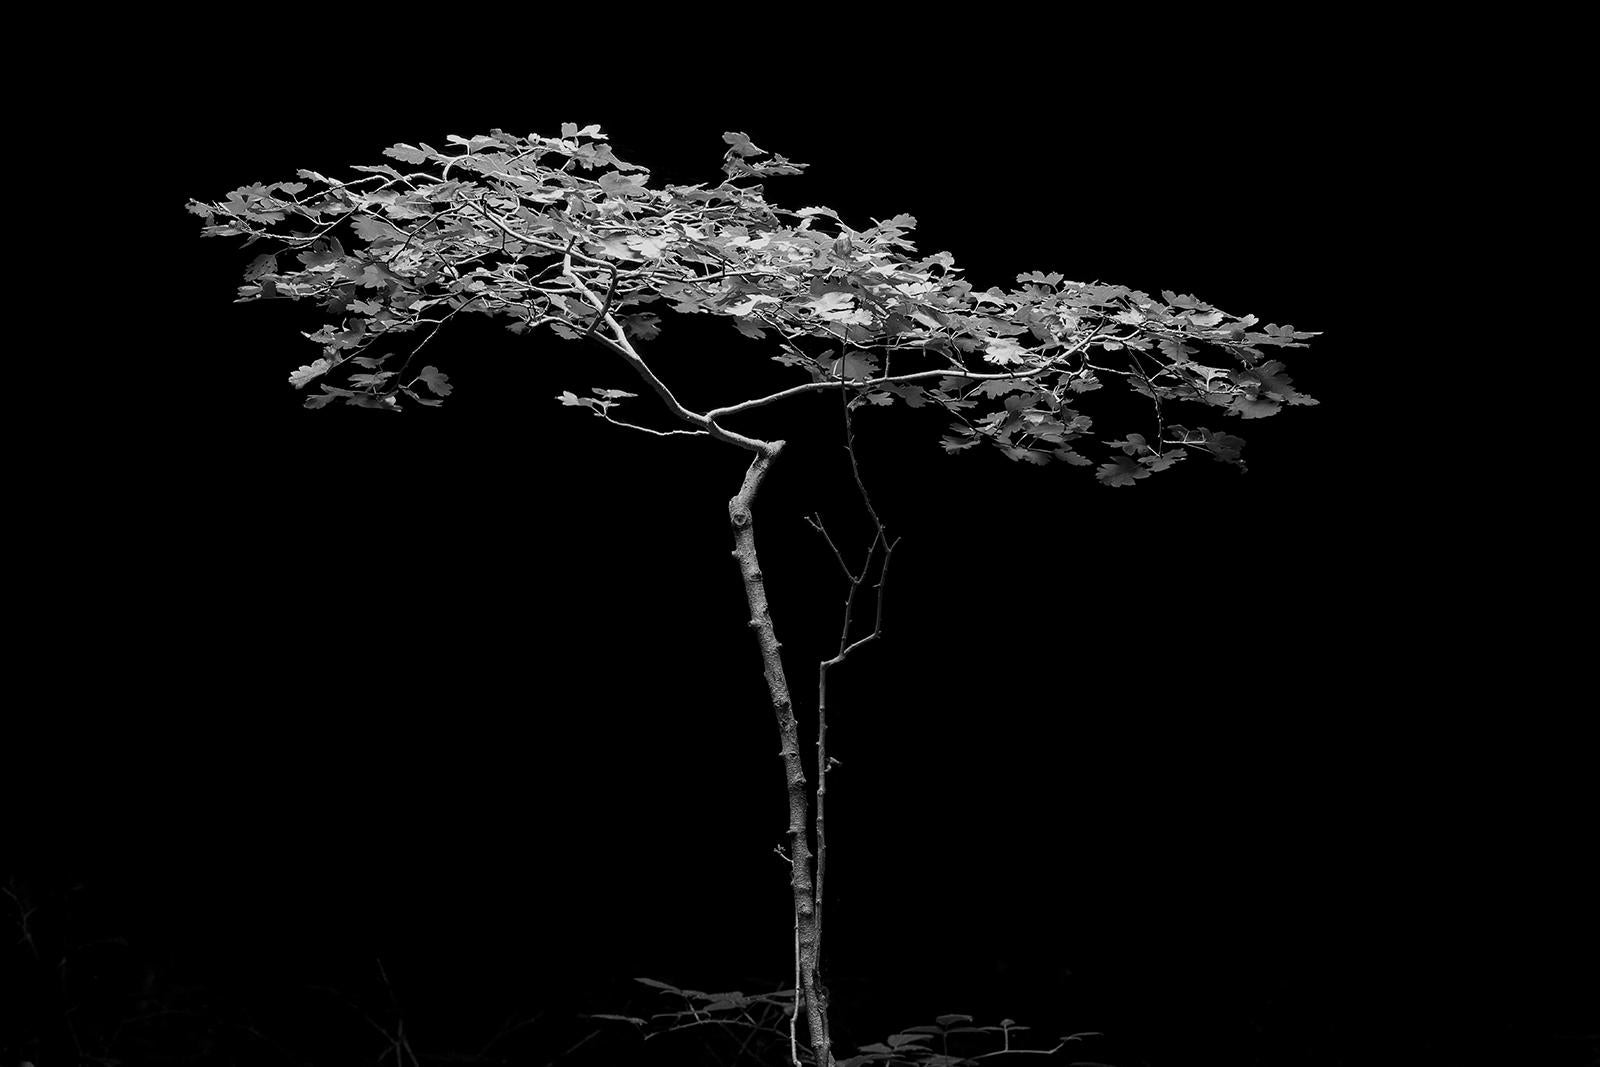 Tree -Signed limited edition fine art print, Black and White Nature Photography